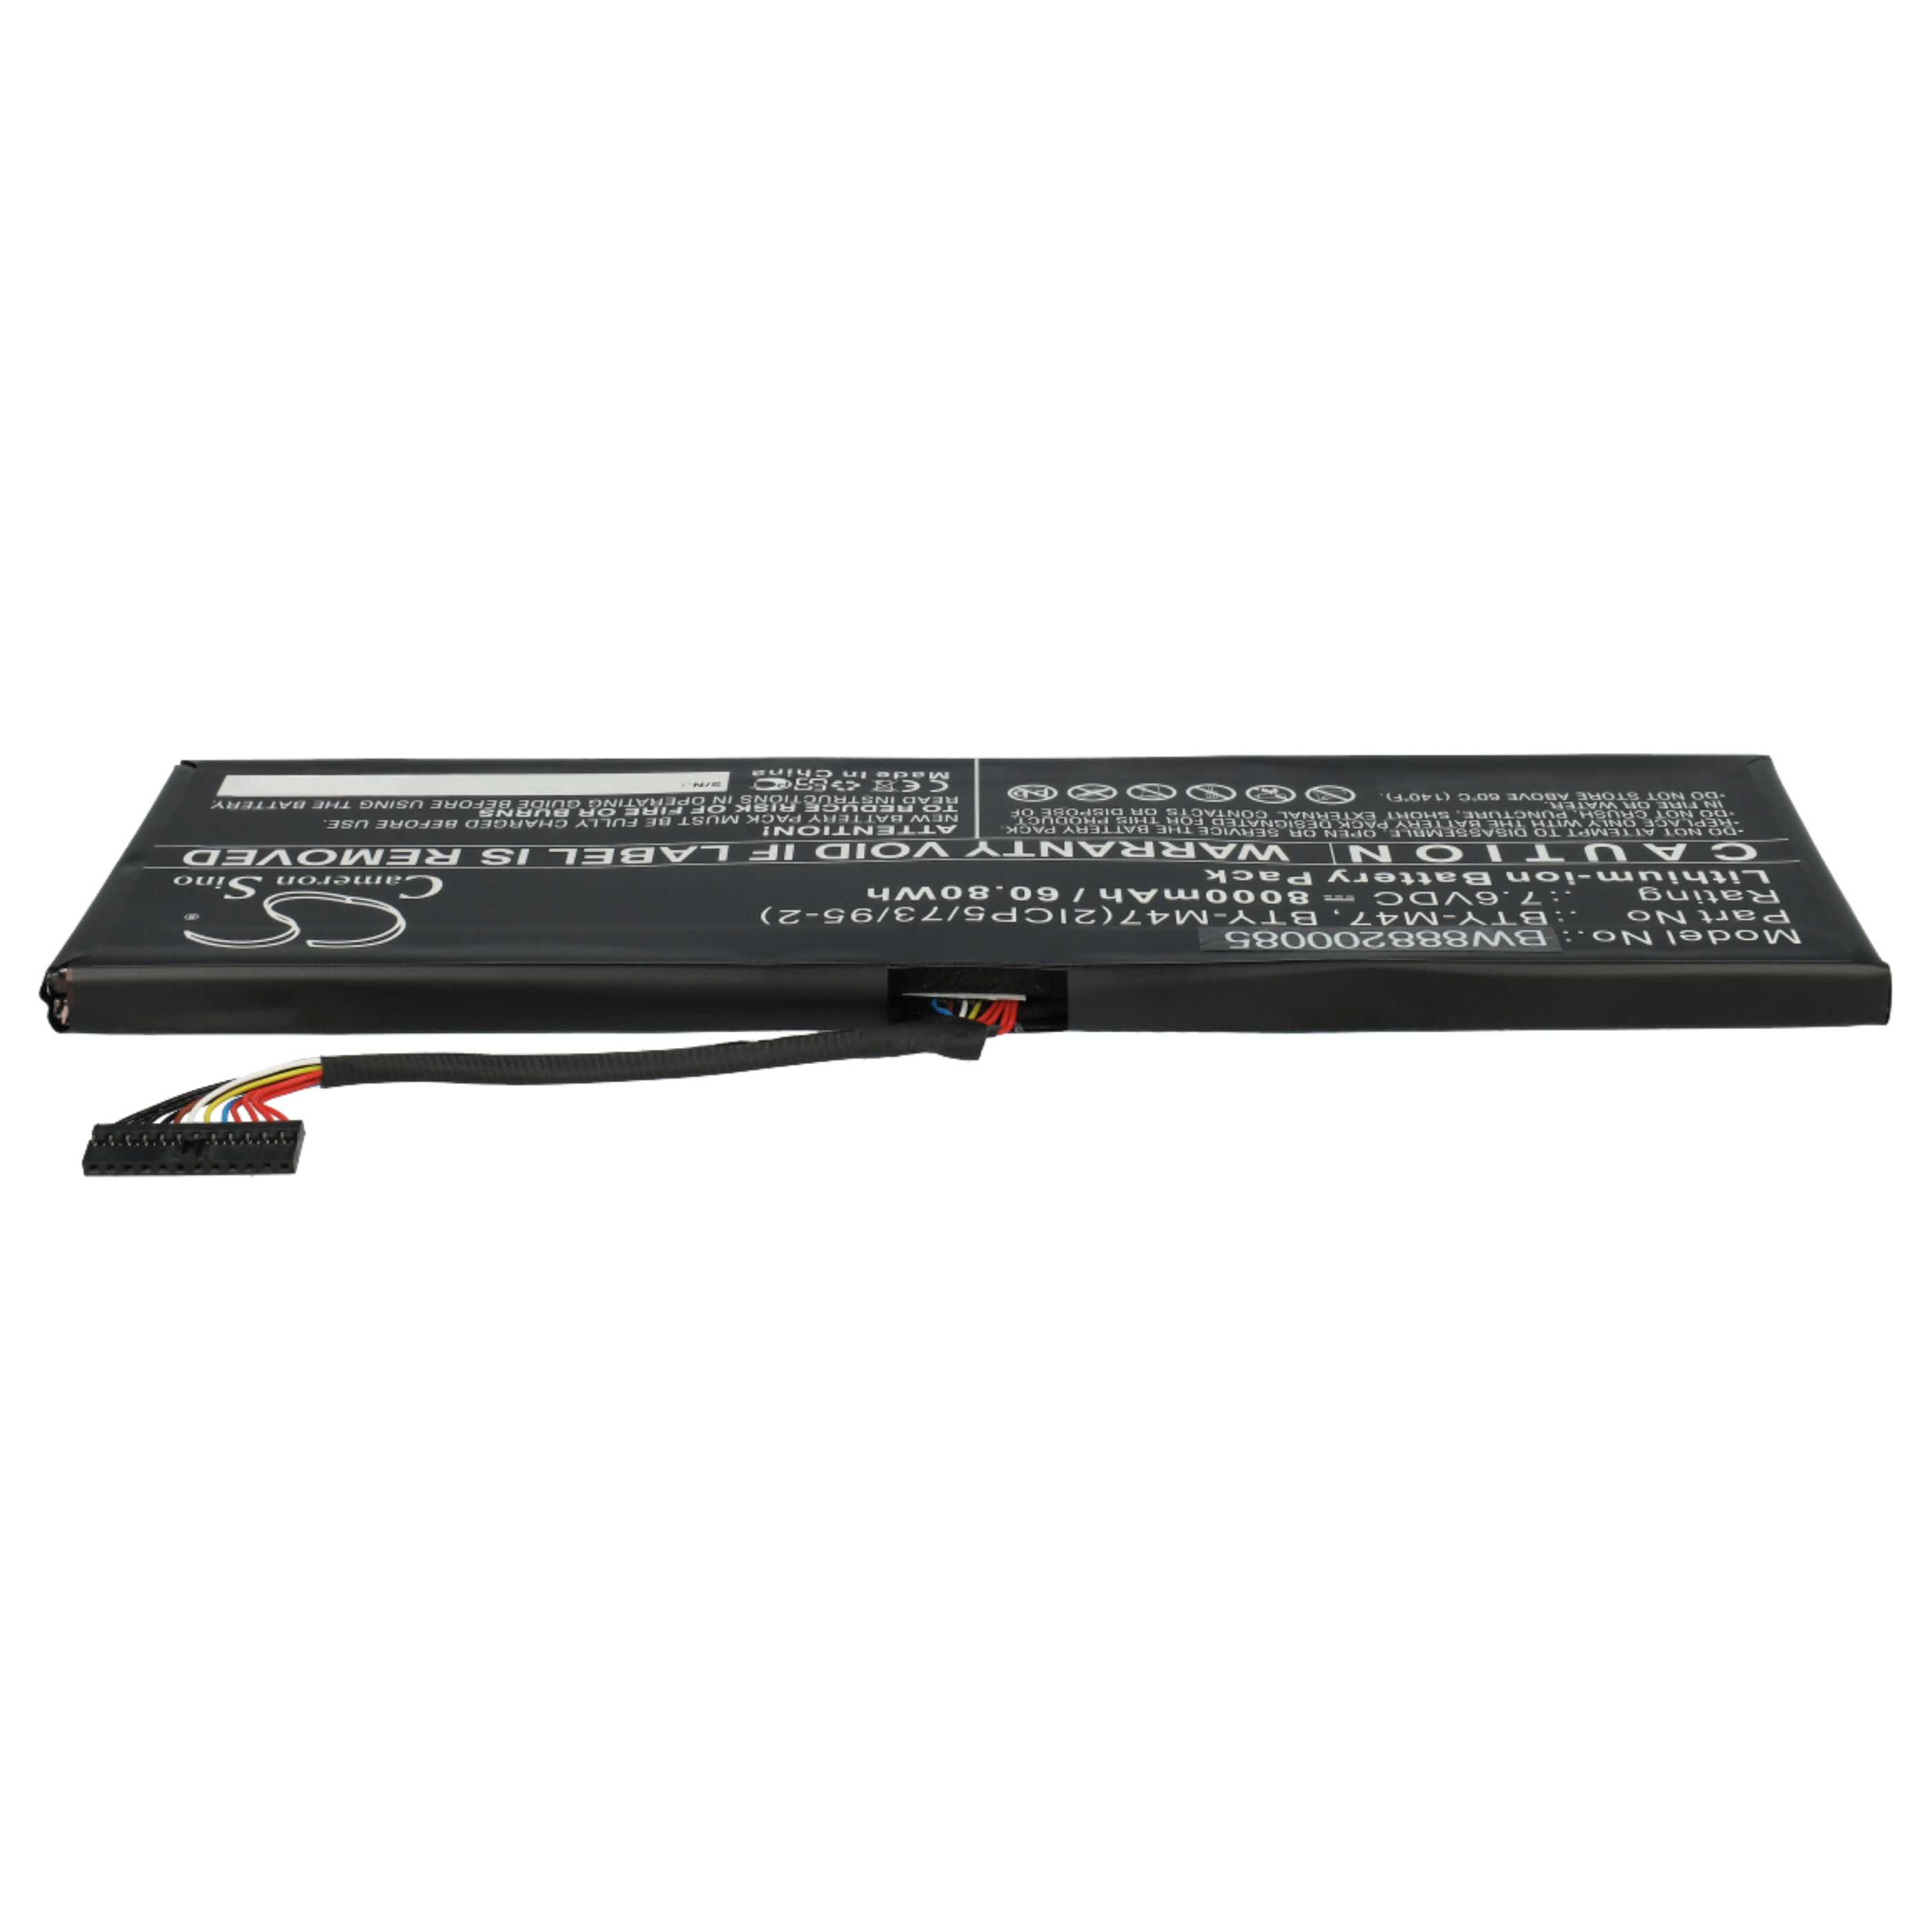 Notebook Battery Replacement for MSI BTY-M47, BTY-M47(2ICP5/73/95-2) - 8060mAh 7.6V Li-Ion, black